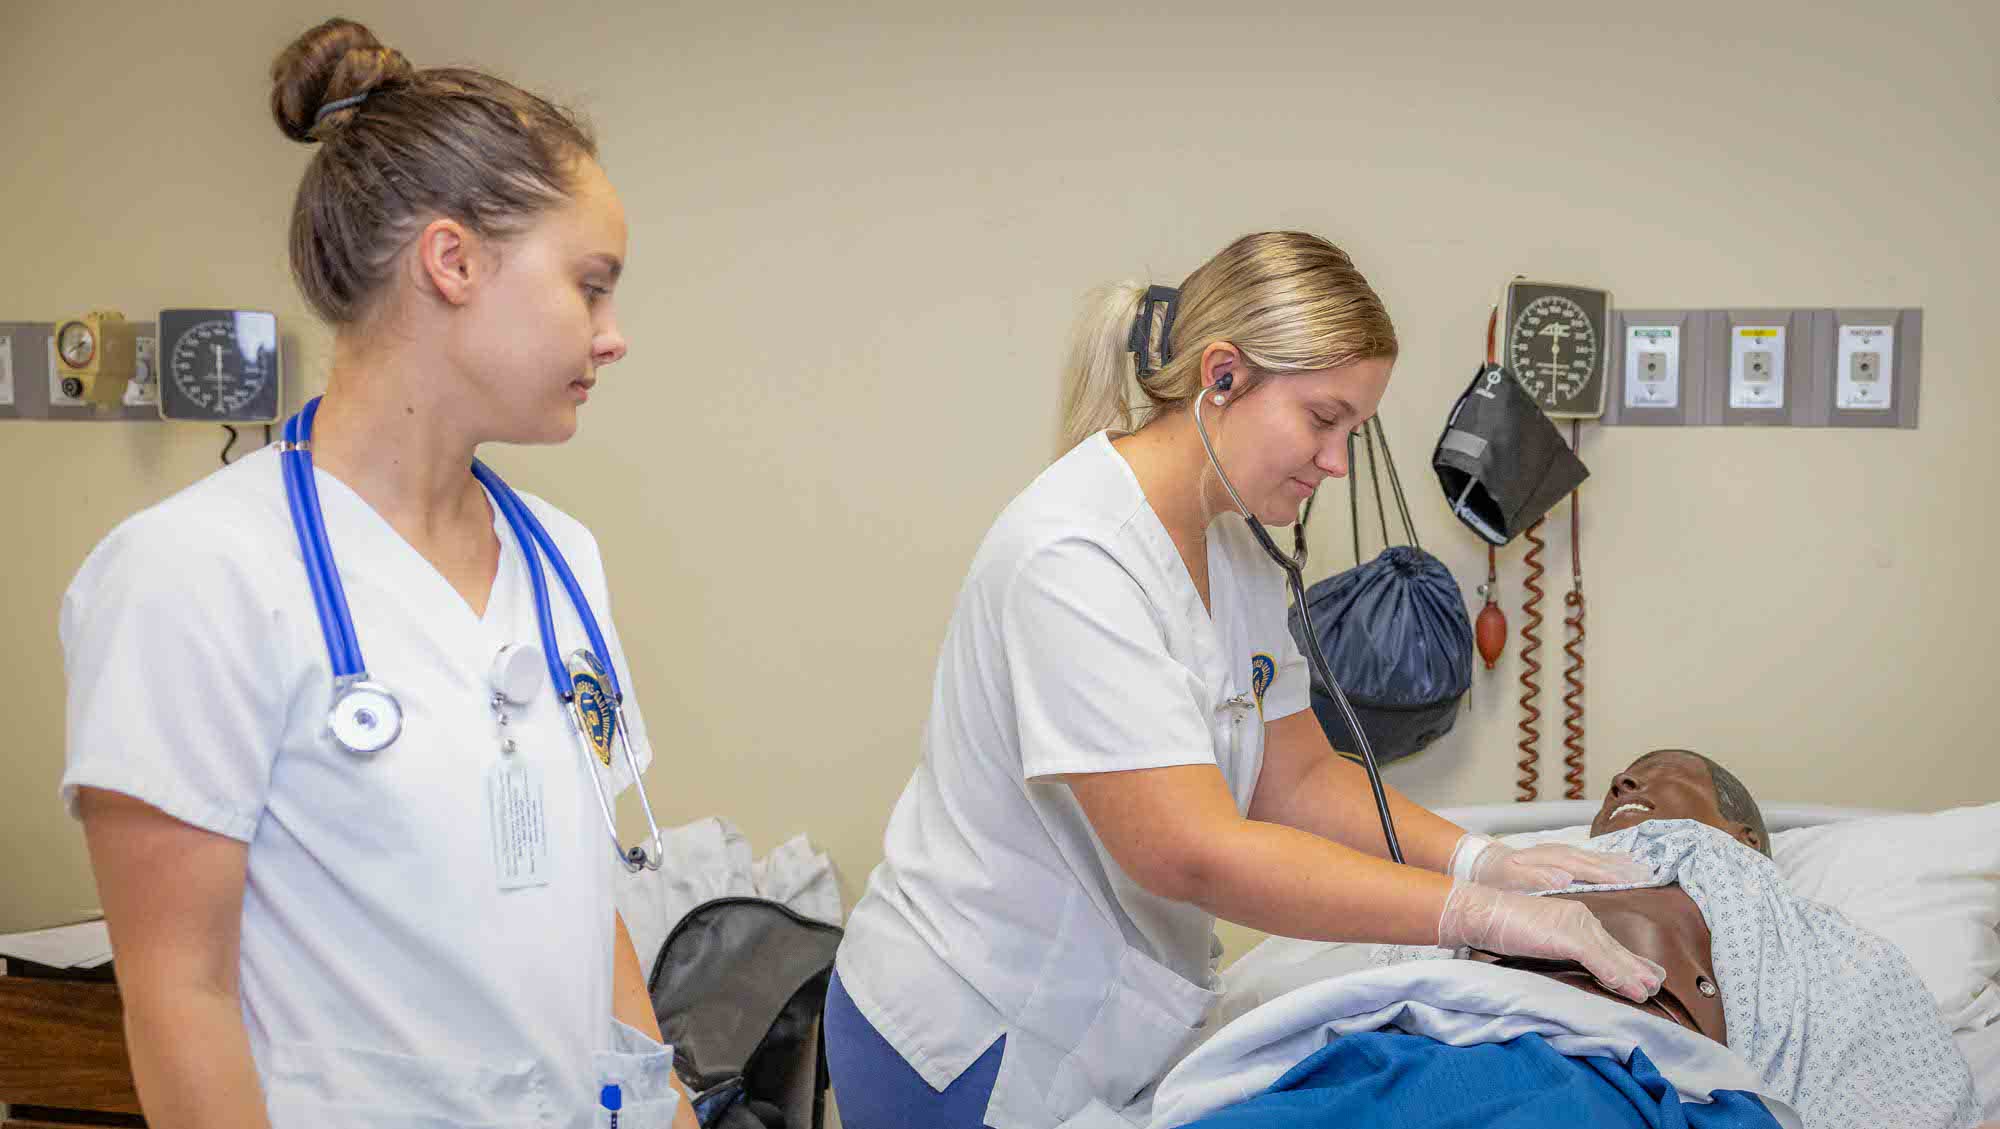 Two nursing students practicing technique on a training dummy.